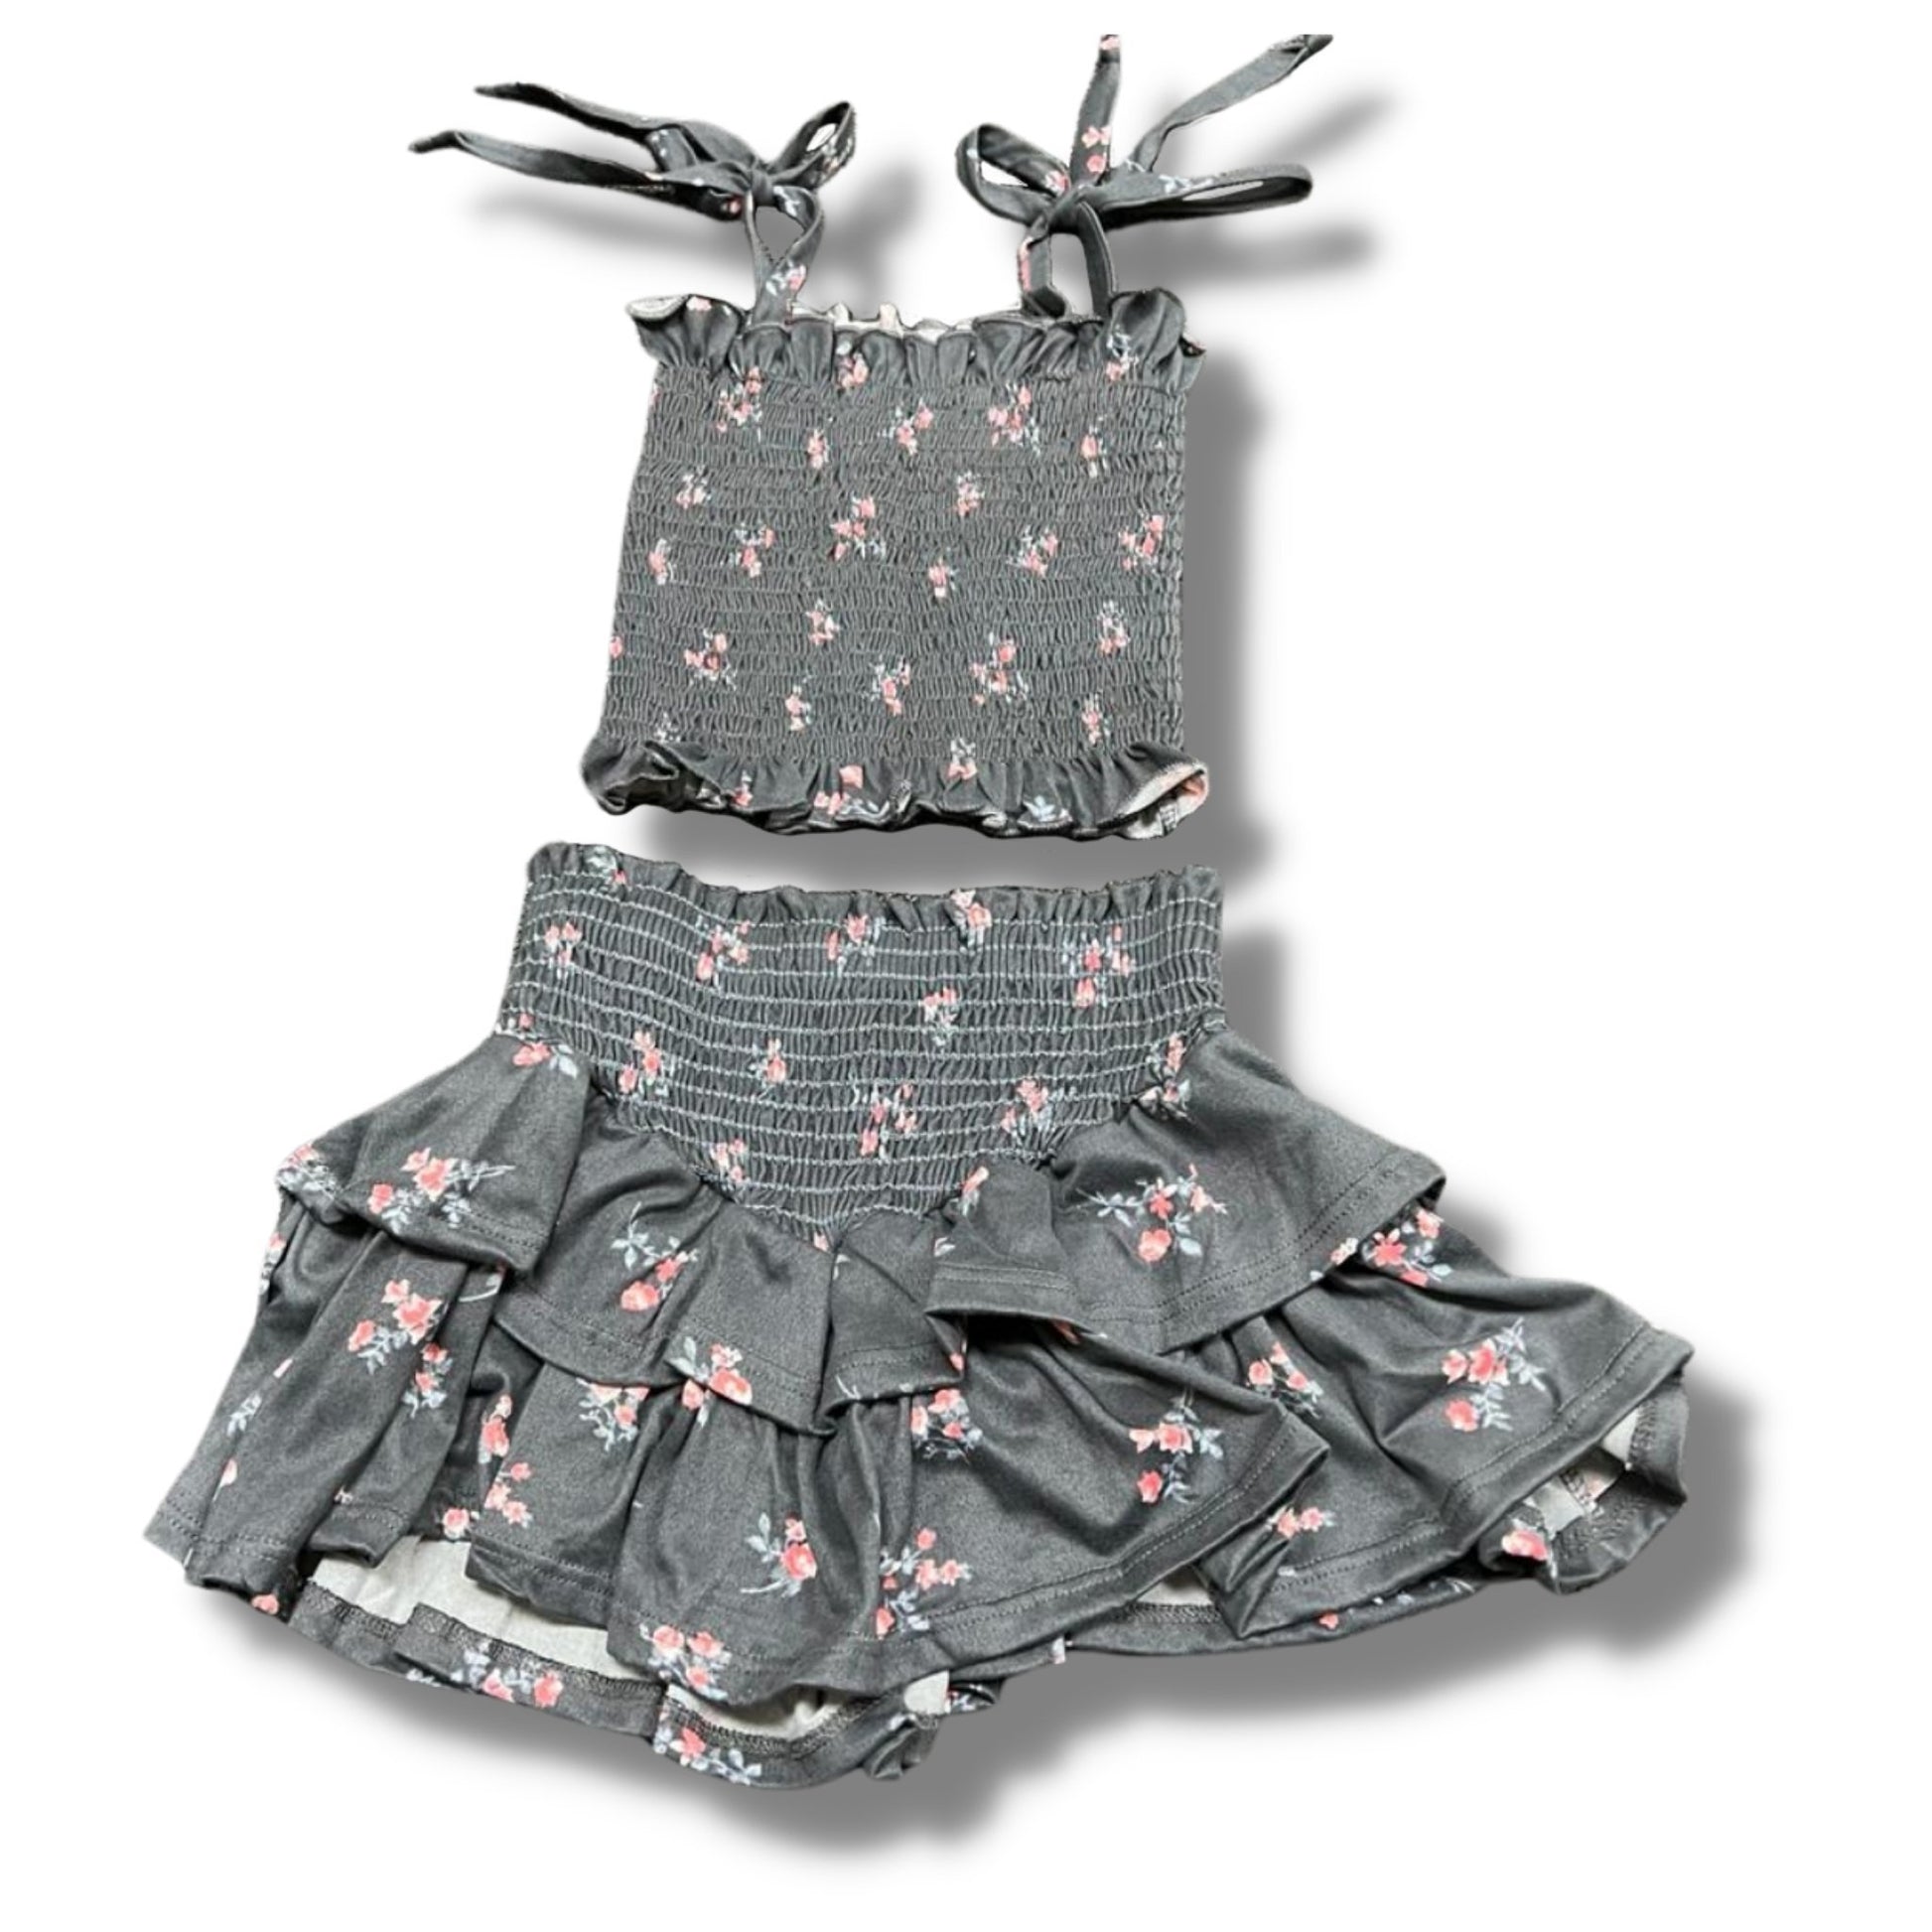 Tweenstyle Charcoal Floral Print On Soft Jersey Smoked Waist Tiered Skirt - a Spirit Animal - Skirts $45-$60 Blush bottoms